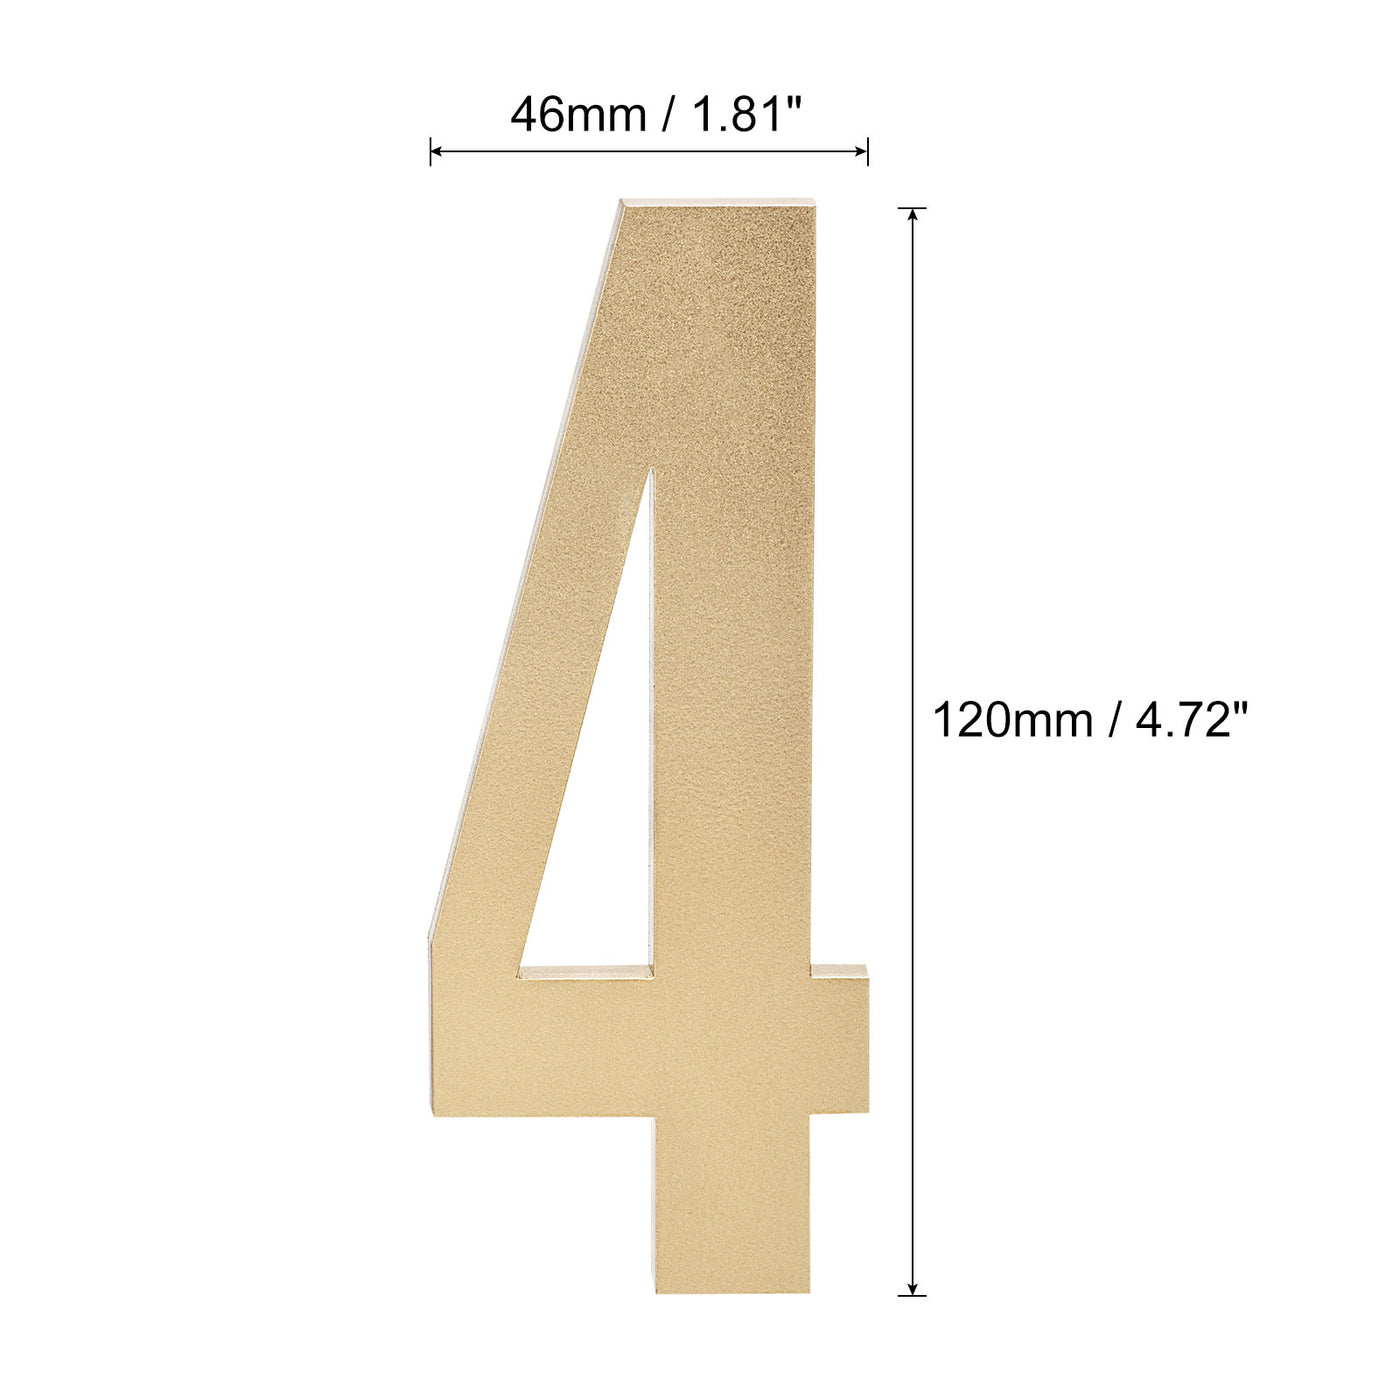 Uxcell Uxcell 4.72 Inch Self-Adhesive House Number for Hotel Mailbox Address, Gold Number 1